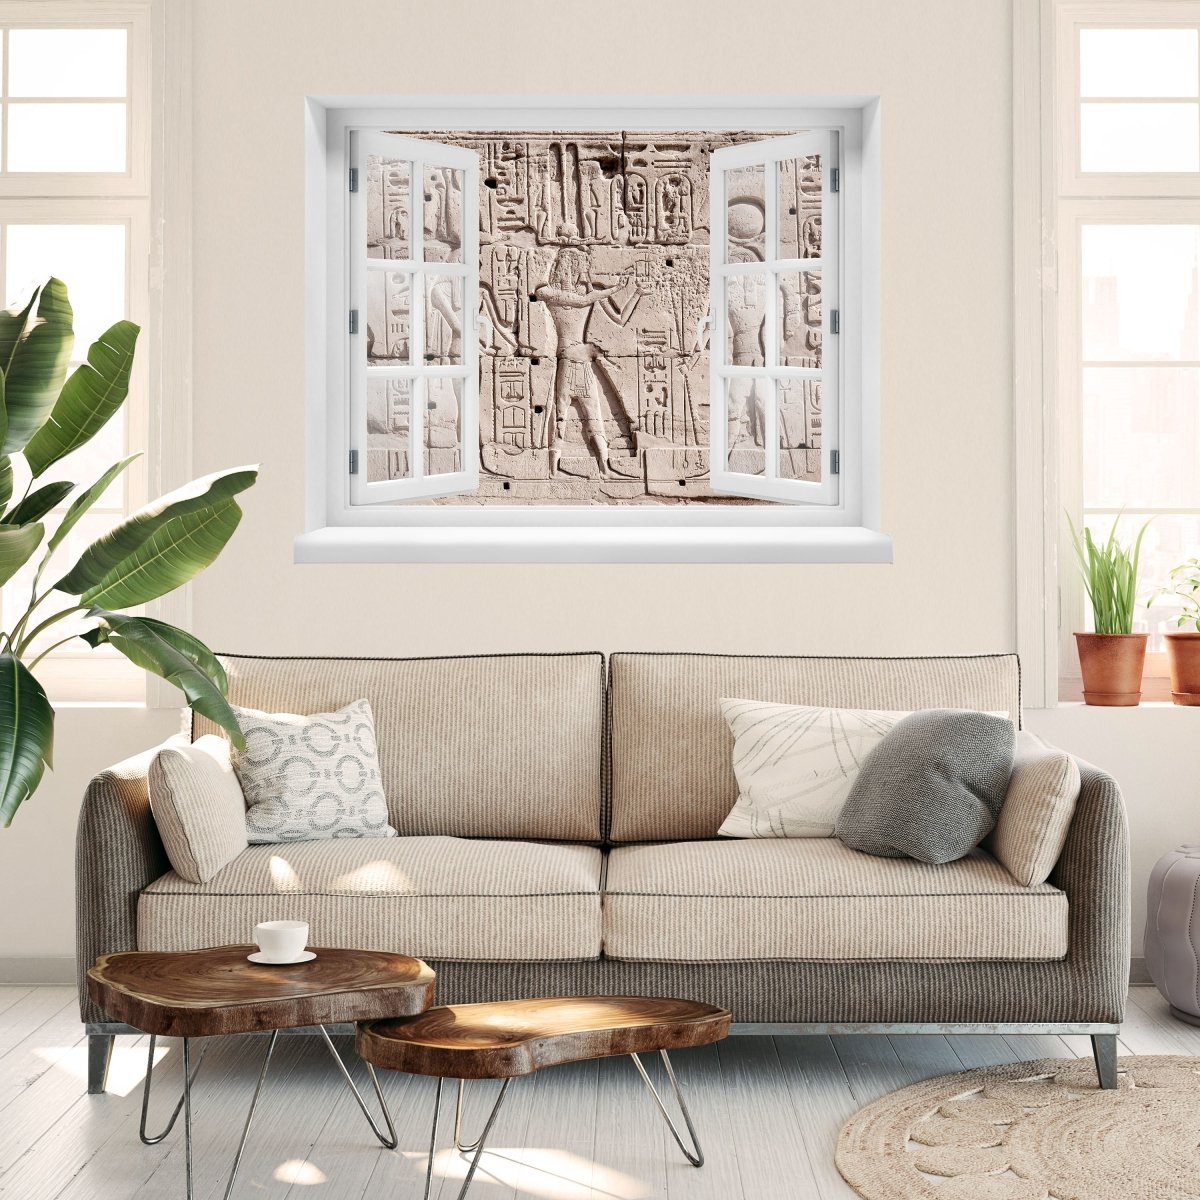 3D wall sticker carvings of hieroglyphs on the wall - Wall Decal M0817